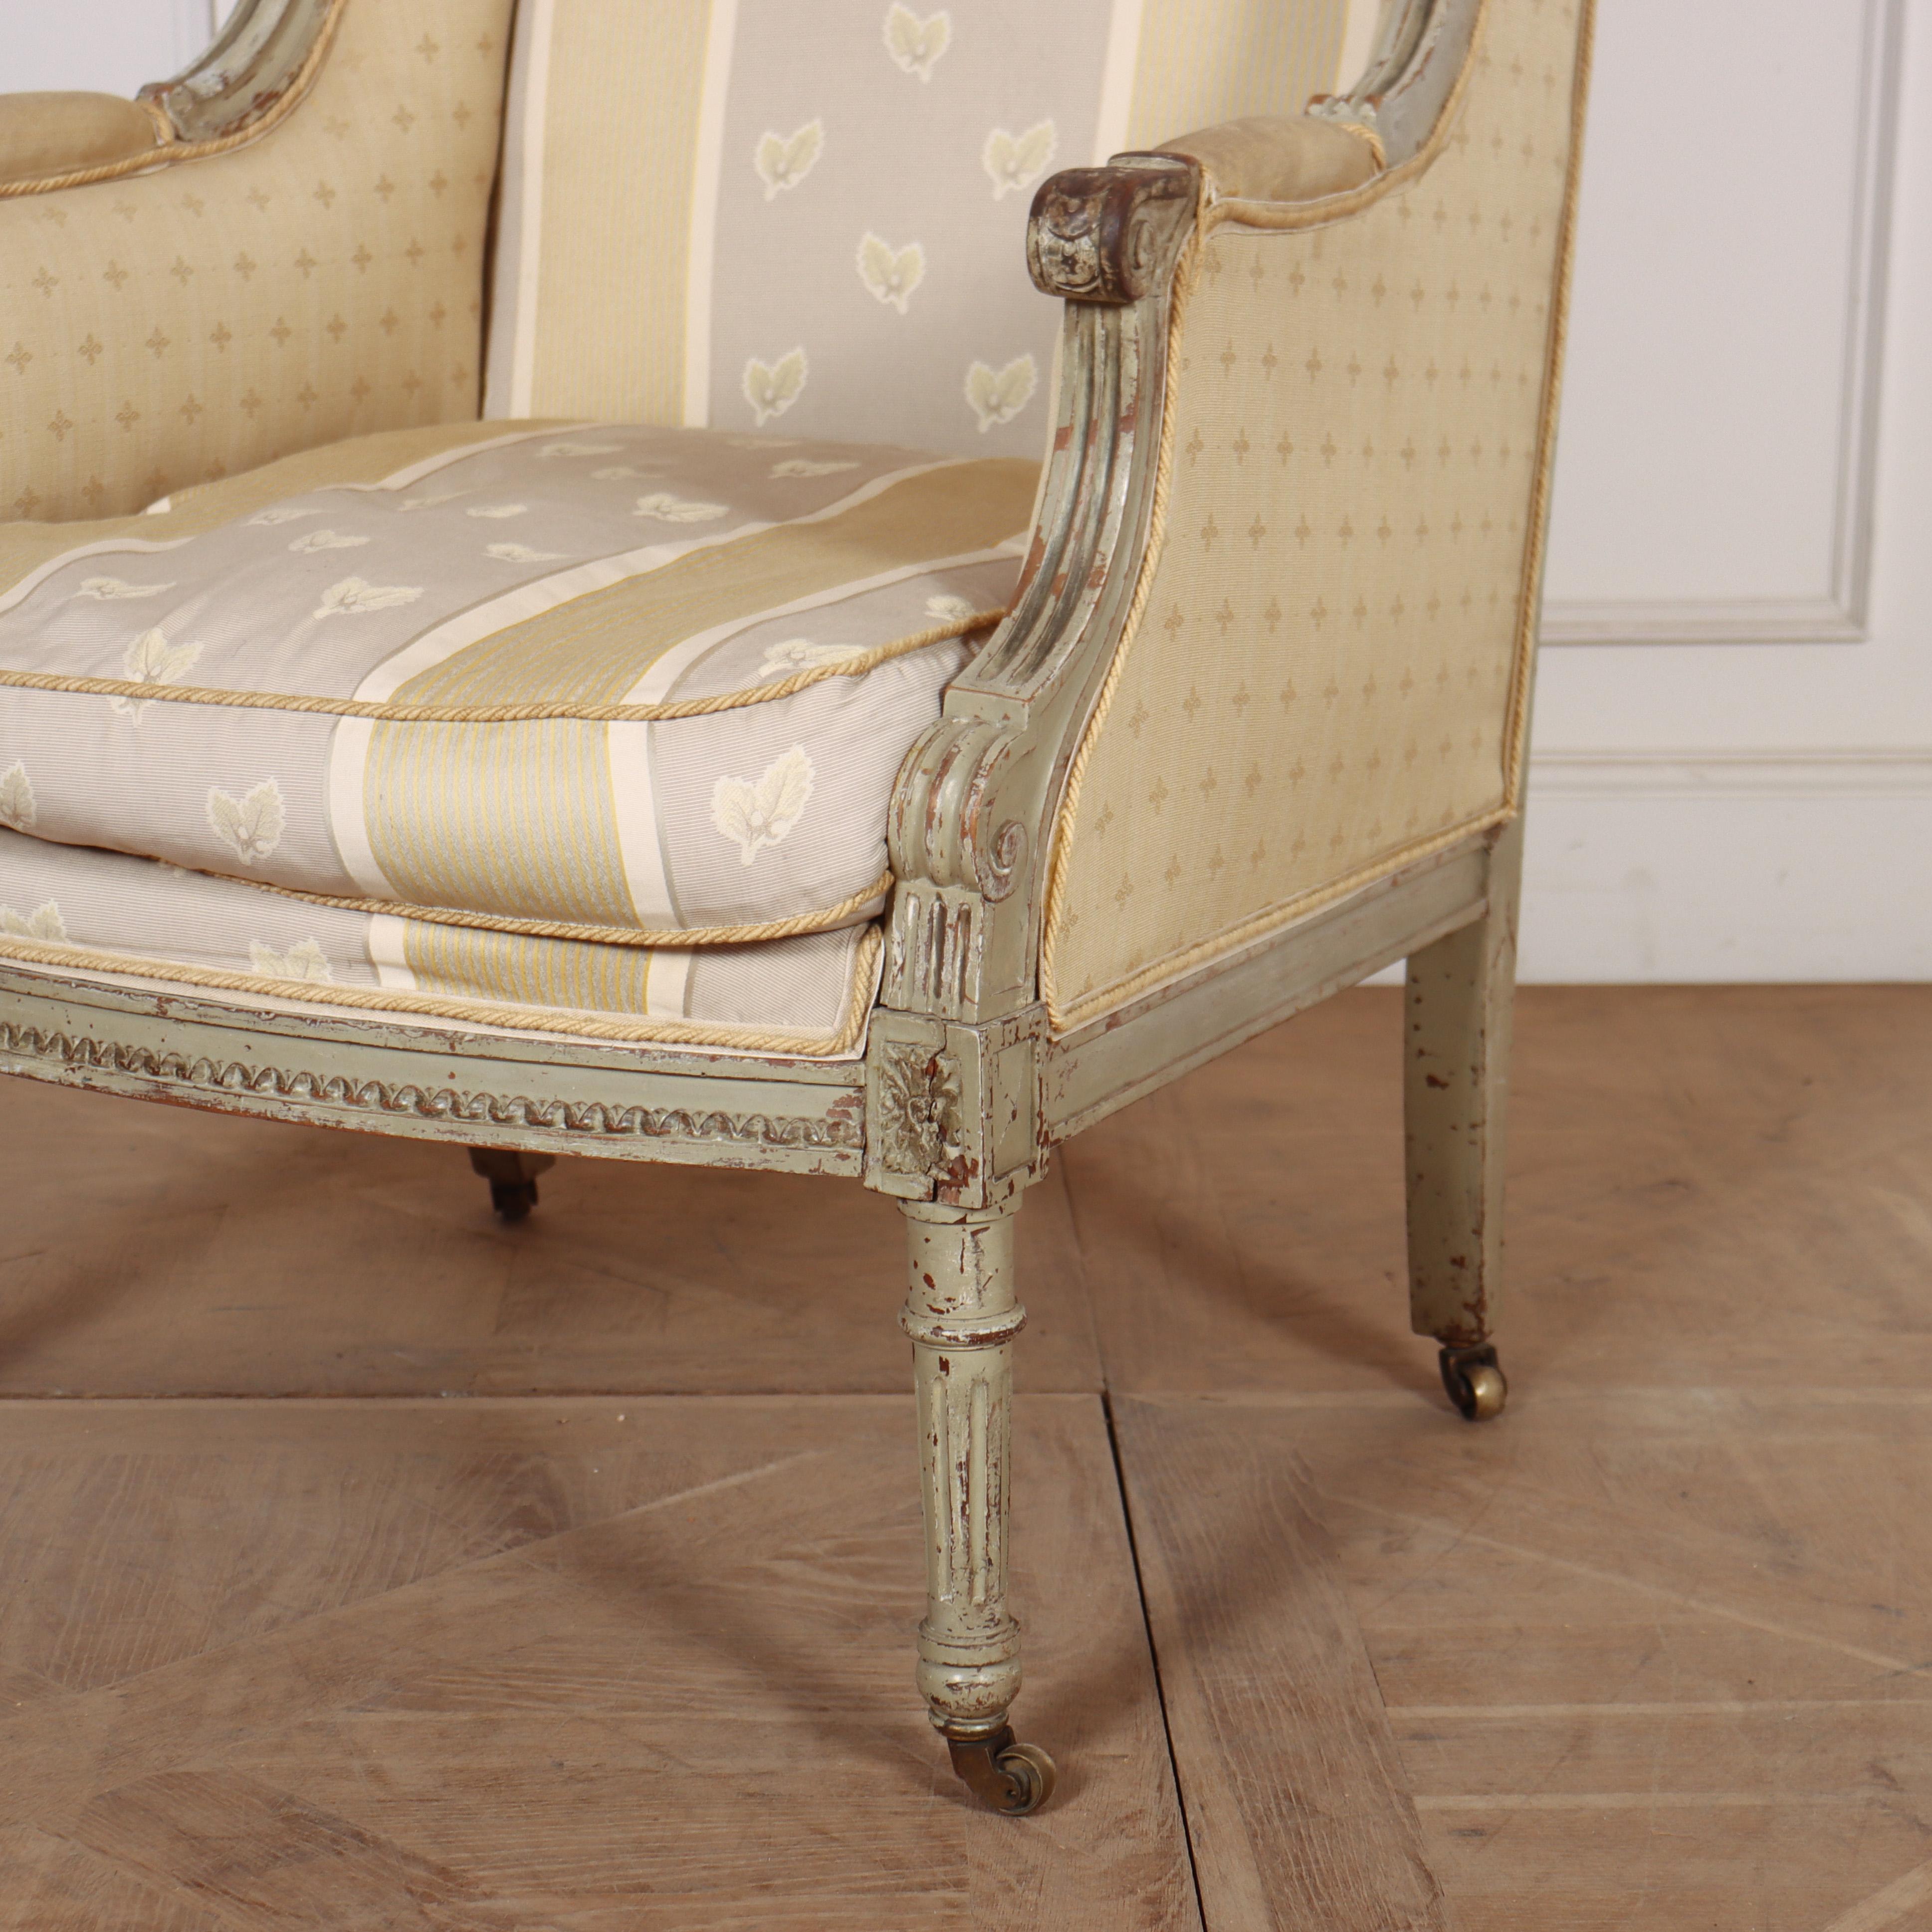 19th C French Directoire style armchair. 1880.

Seat is 22